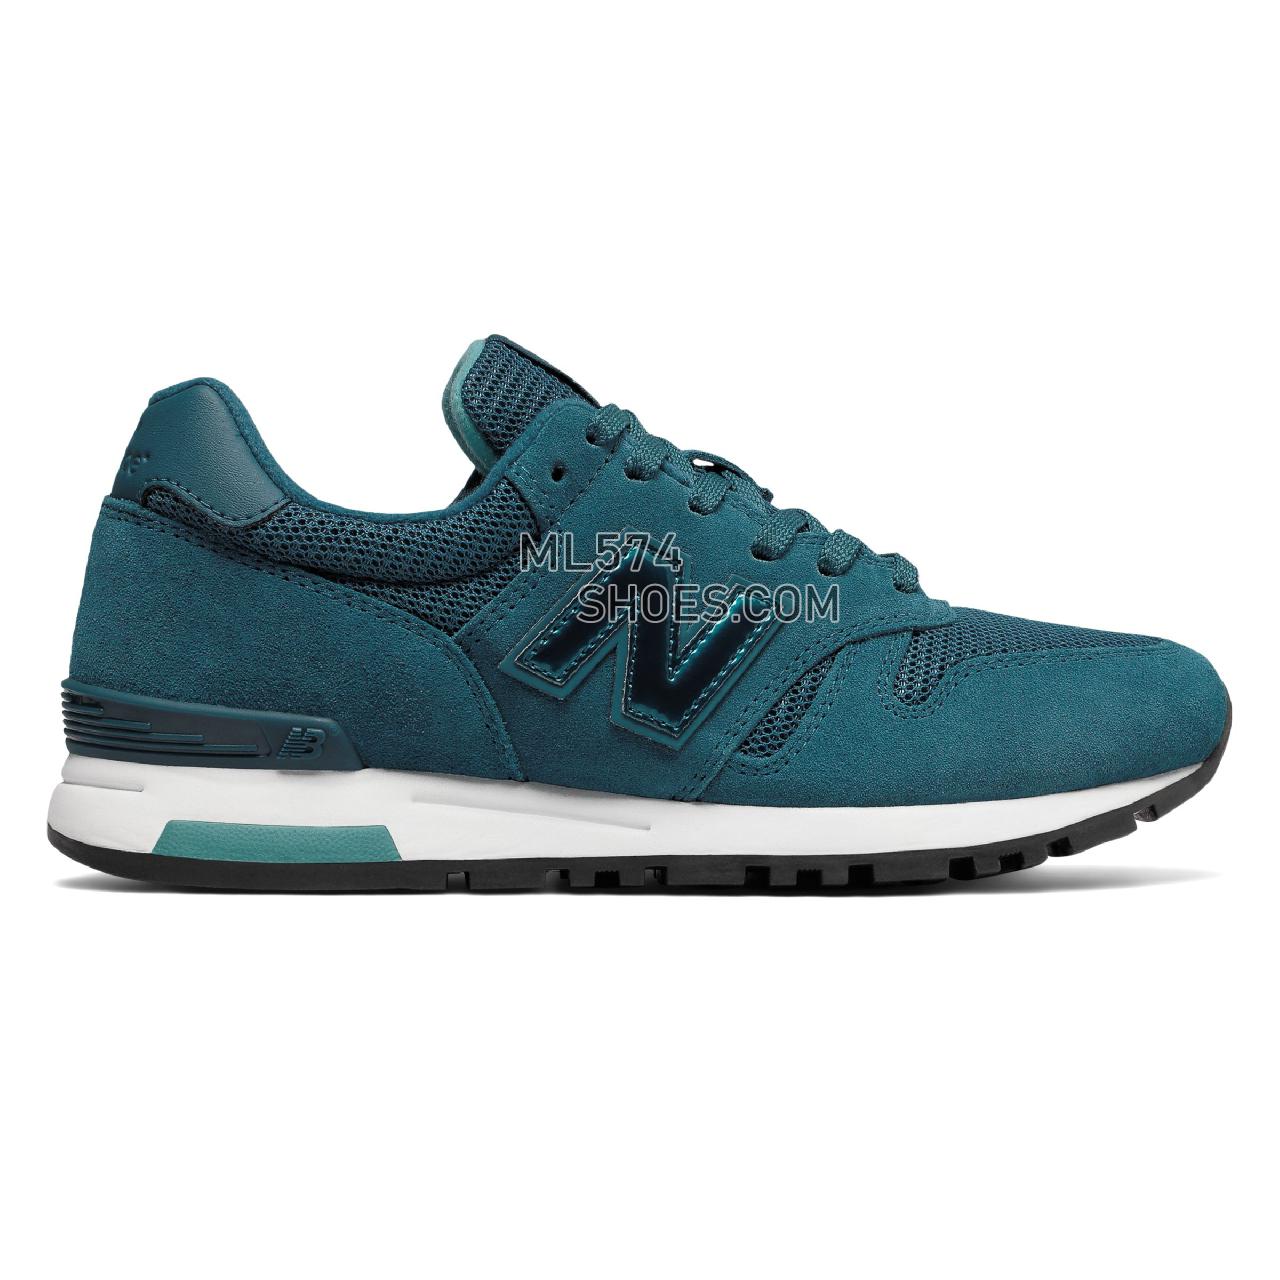 New Balance 565 New Balance - Women's 565 New Balance Classic - Teal with White - WL565STT